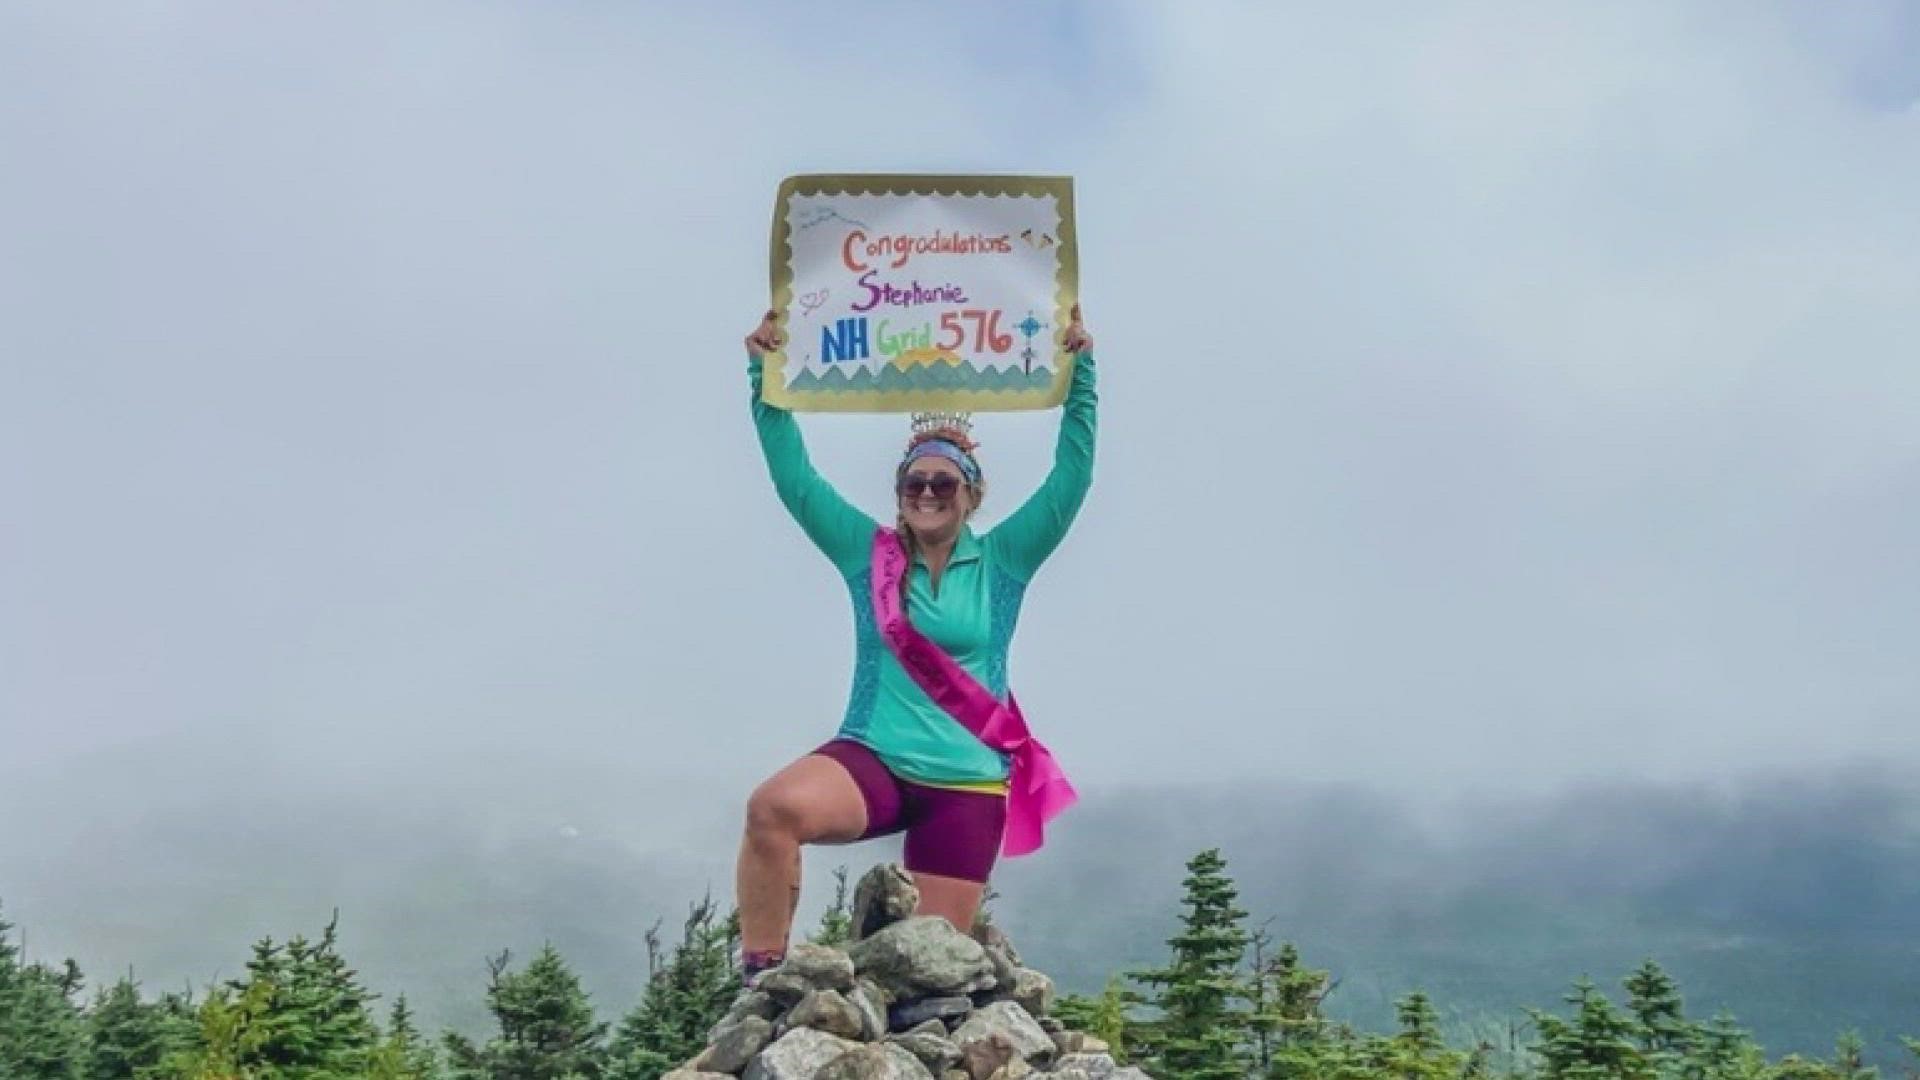 The challenge requires a hiker to climb all 48 4,000-footers in the White Mountains in each calendar month. Stephanie Dragoon is the 129th person to complete it.